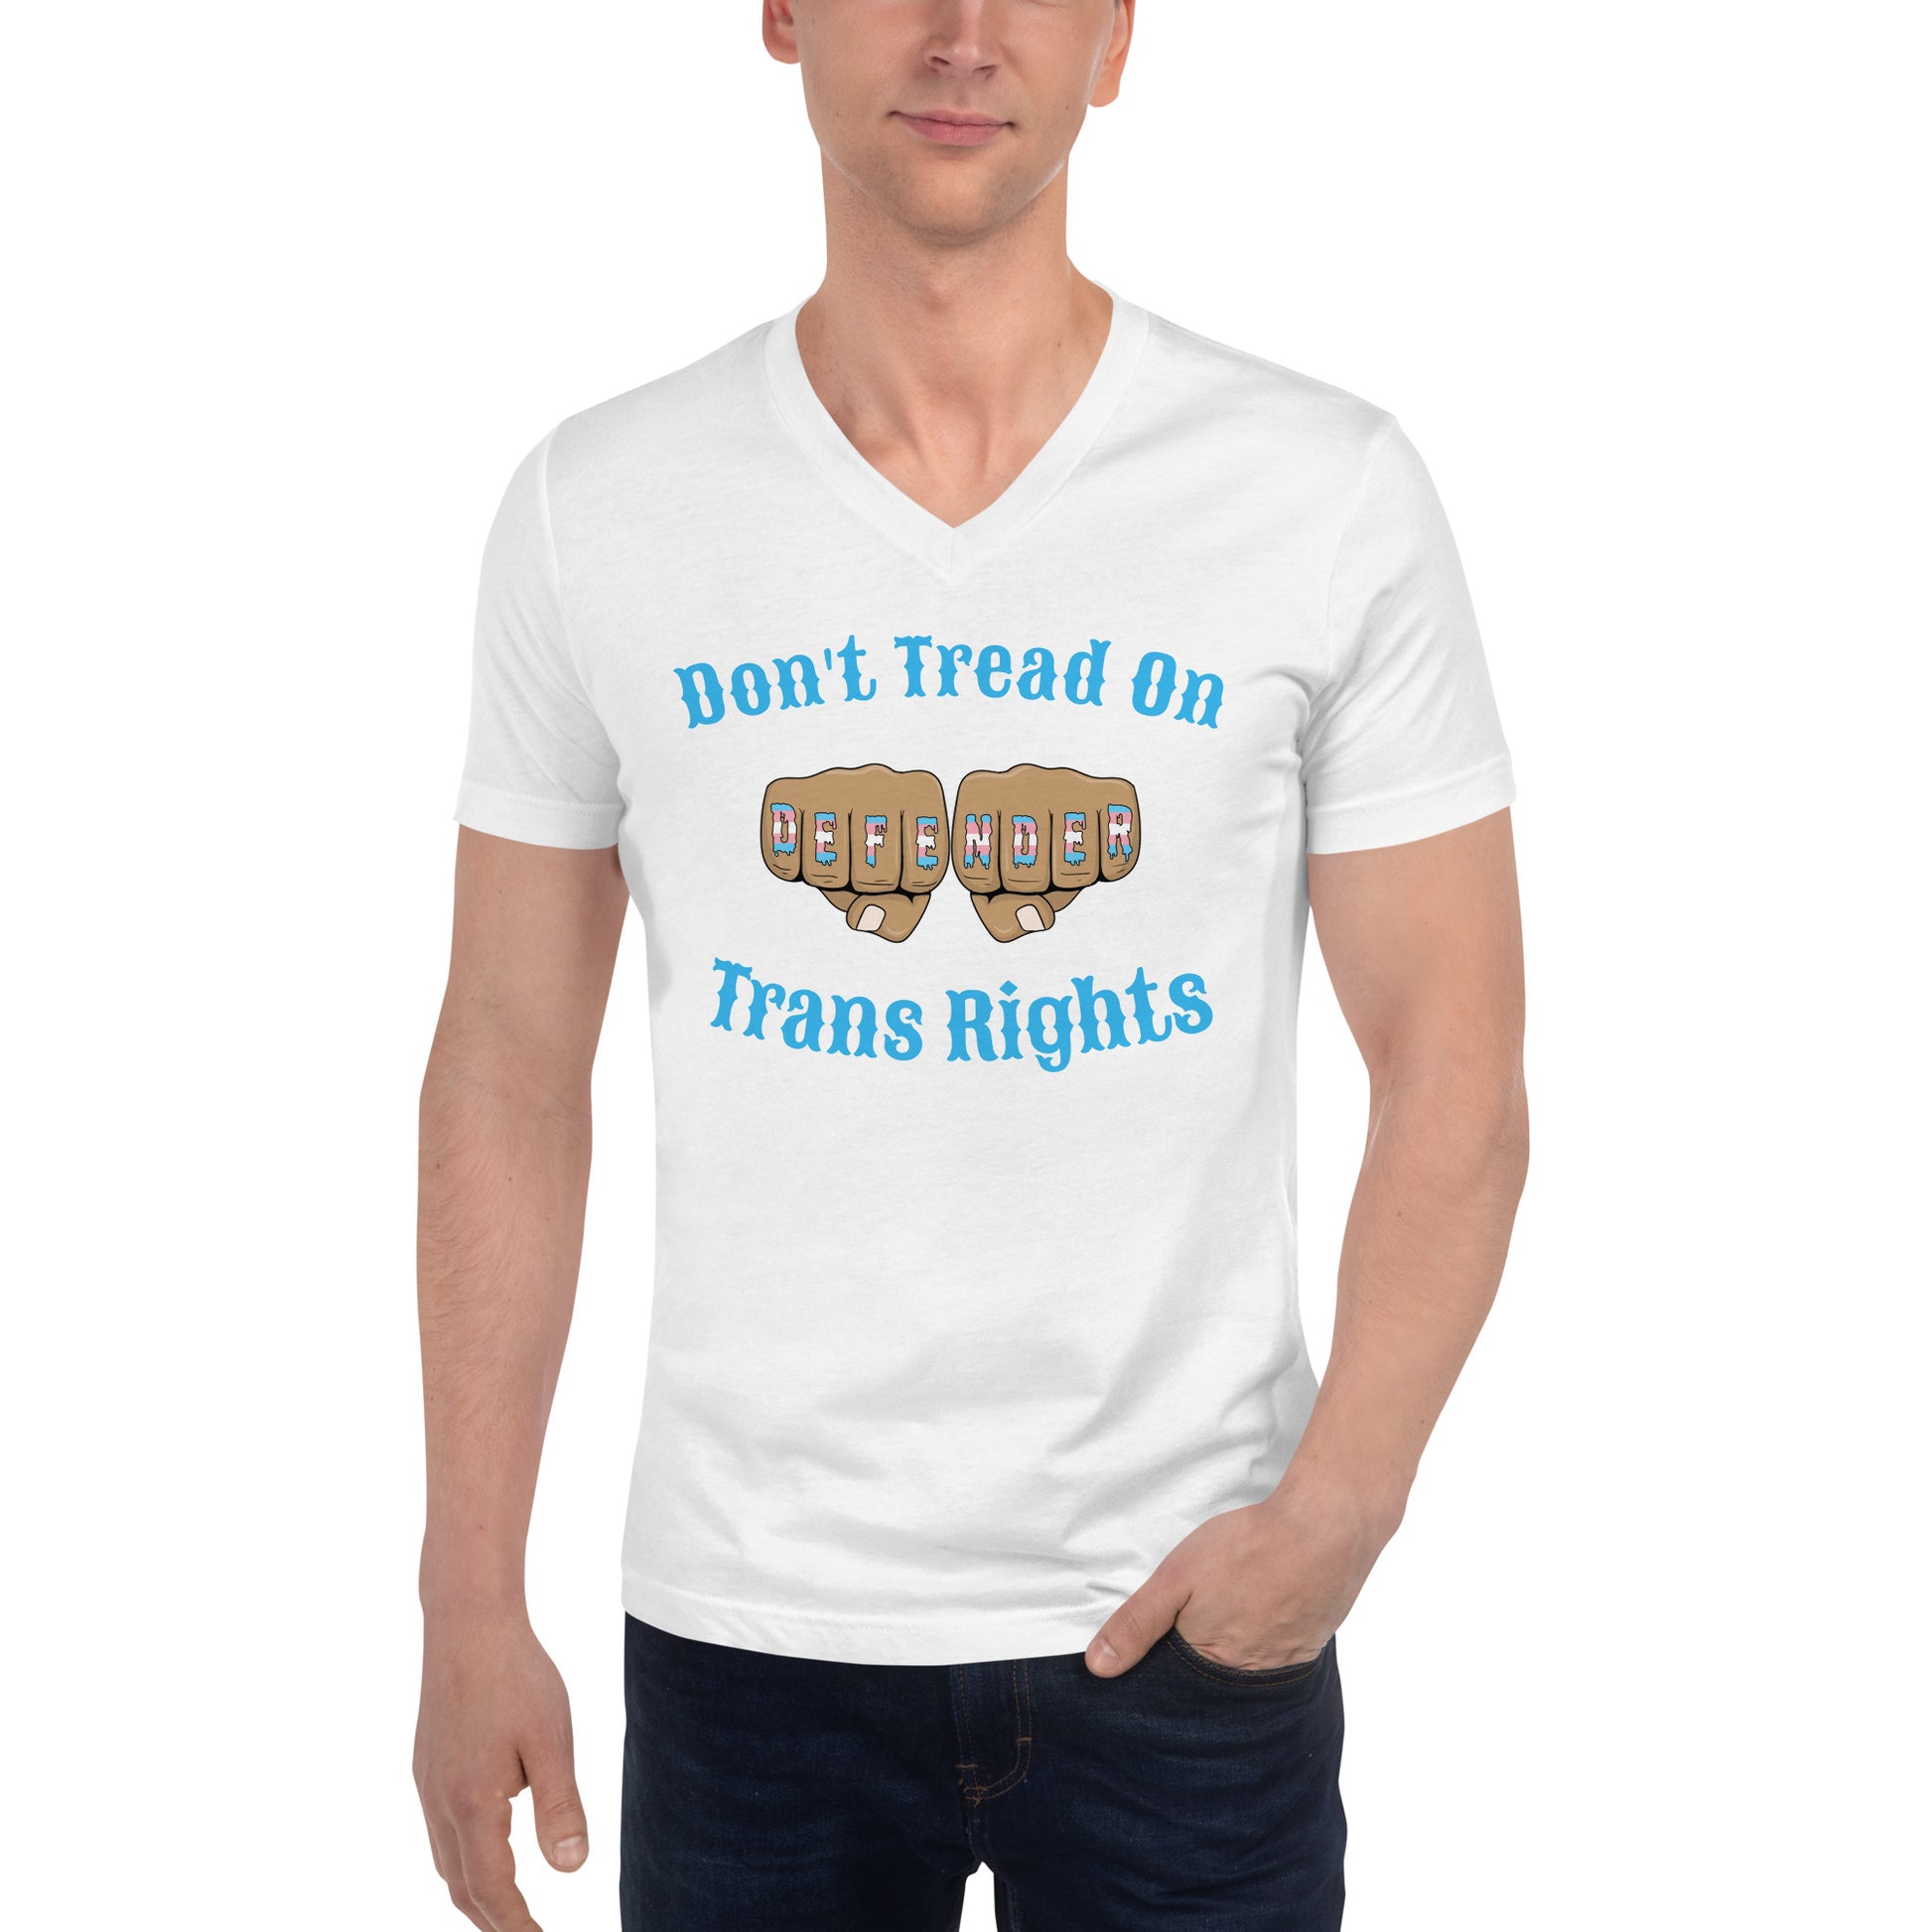 A v-neck, short sleeve t-shirt in white with the text "Don't Tread on Trans Rights" in blue lettering circling an image of fists with "defender" written across the knuckles in blue, pink, and white. The shirt is on a white, straight sized model standing against a white background.